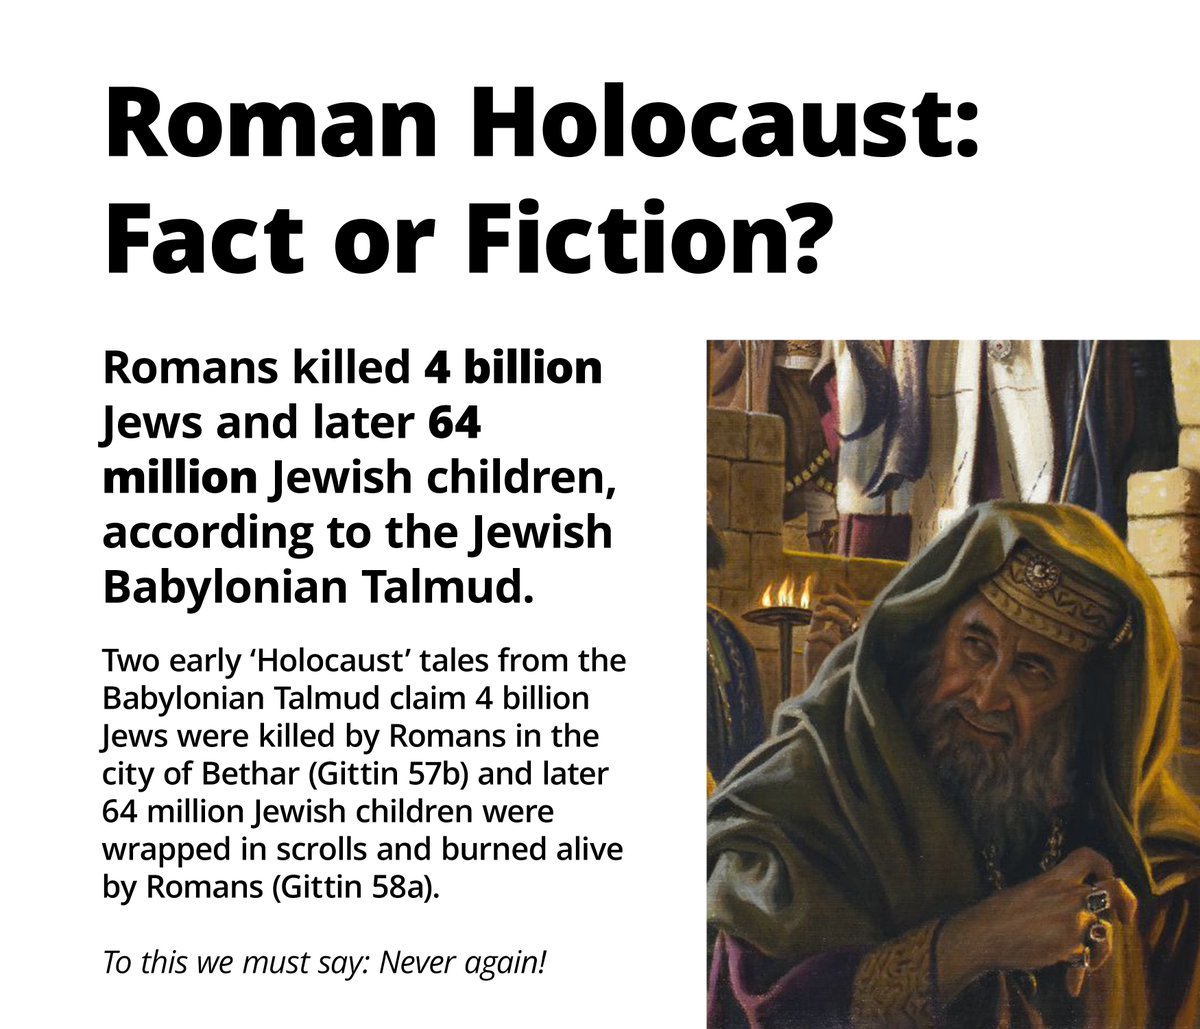 Did you know there are two early “Halocaust” tales from the Jwish Babylonian Talmud? They say 4 billion Jws were killed by Romans and later 64 million Jwish children were wrapped in scrolls and burned alive. Fact or fiction? Src. Chabad.org; Come-and-hear.com